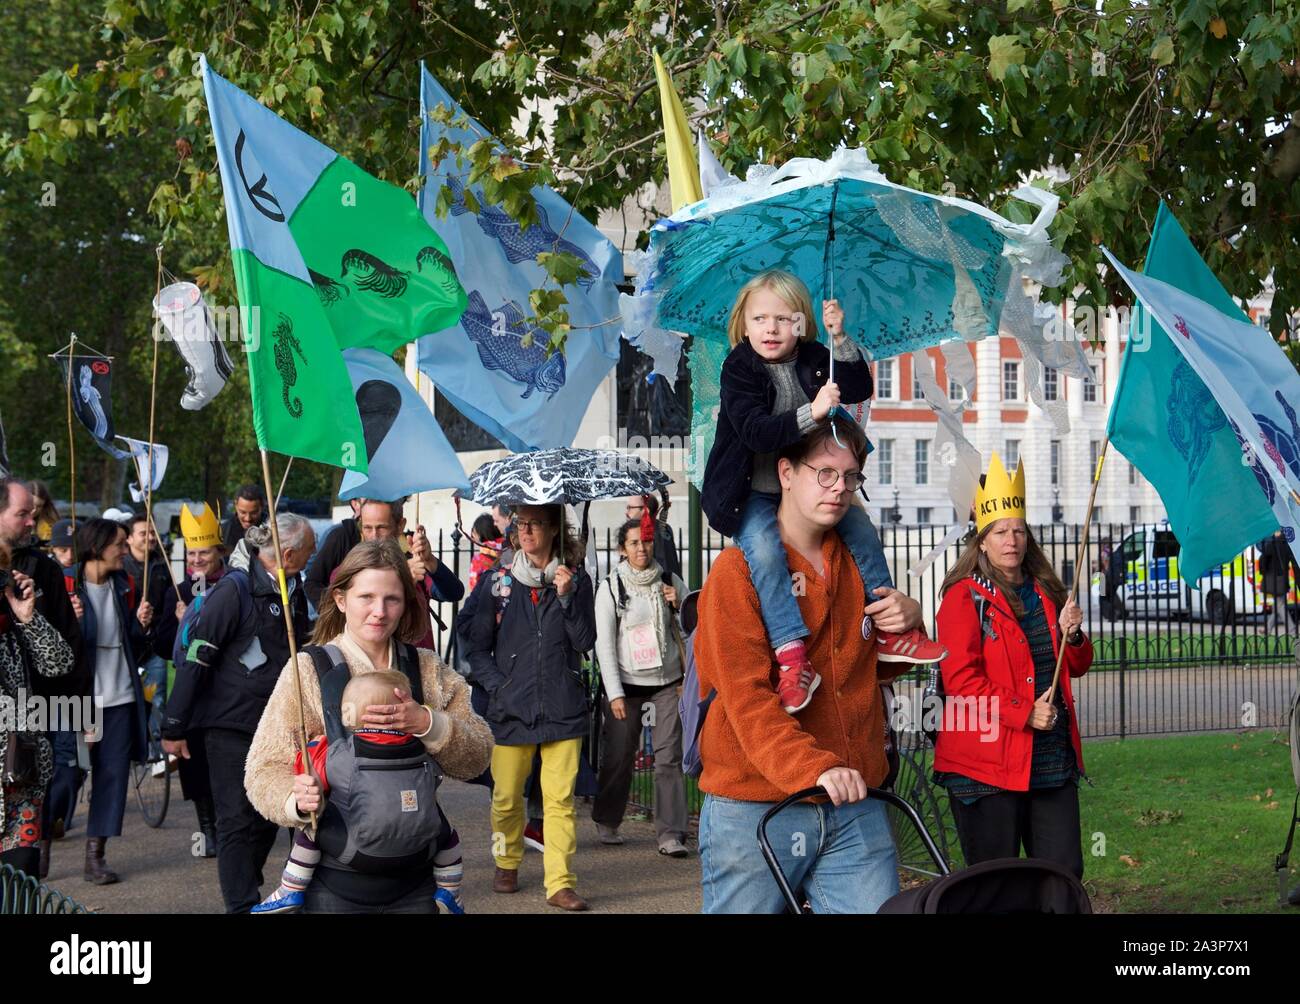 London, UK. 09th Oct, 2019. Environmental activists from Extinction Rebellion protest marching in London on 09 October 2019 in London, England. Protesters plan to blockade the London government district for a two week period, as part of 'International Rebellion' taking place in over 60 cities around the world, calling for decisive and immediate action from governments in the face of climate and ecological emergency. Photo by Alan Stanford. Credit: PRiME Media Images/Alamy Live News Stock Photo